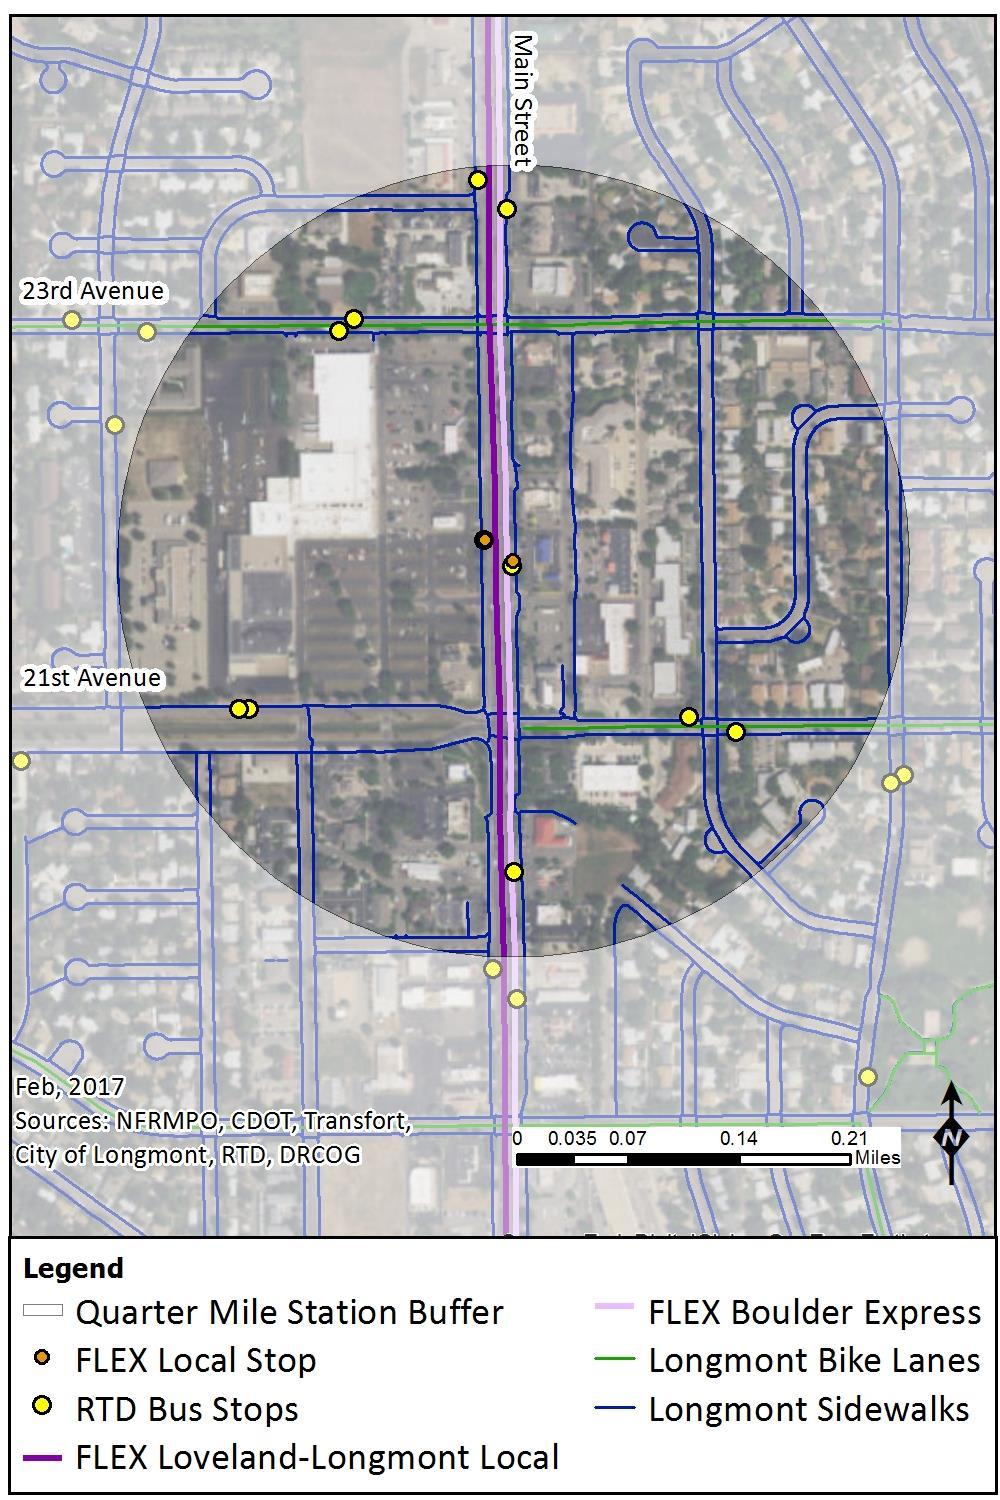 Figure 3-46 shows the network of sidewalks and bicycle lanes making up the non-motorized network near the Main Street and 21 st Street stop pair in Longmont.